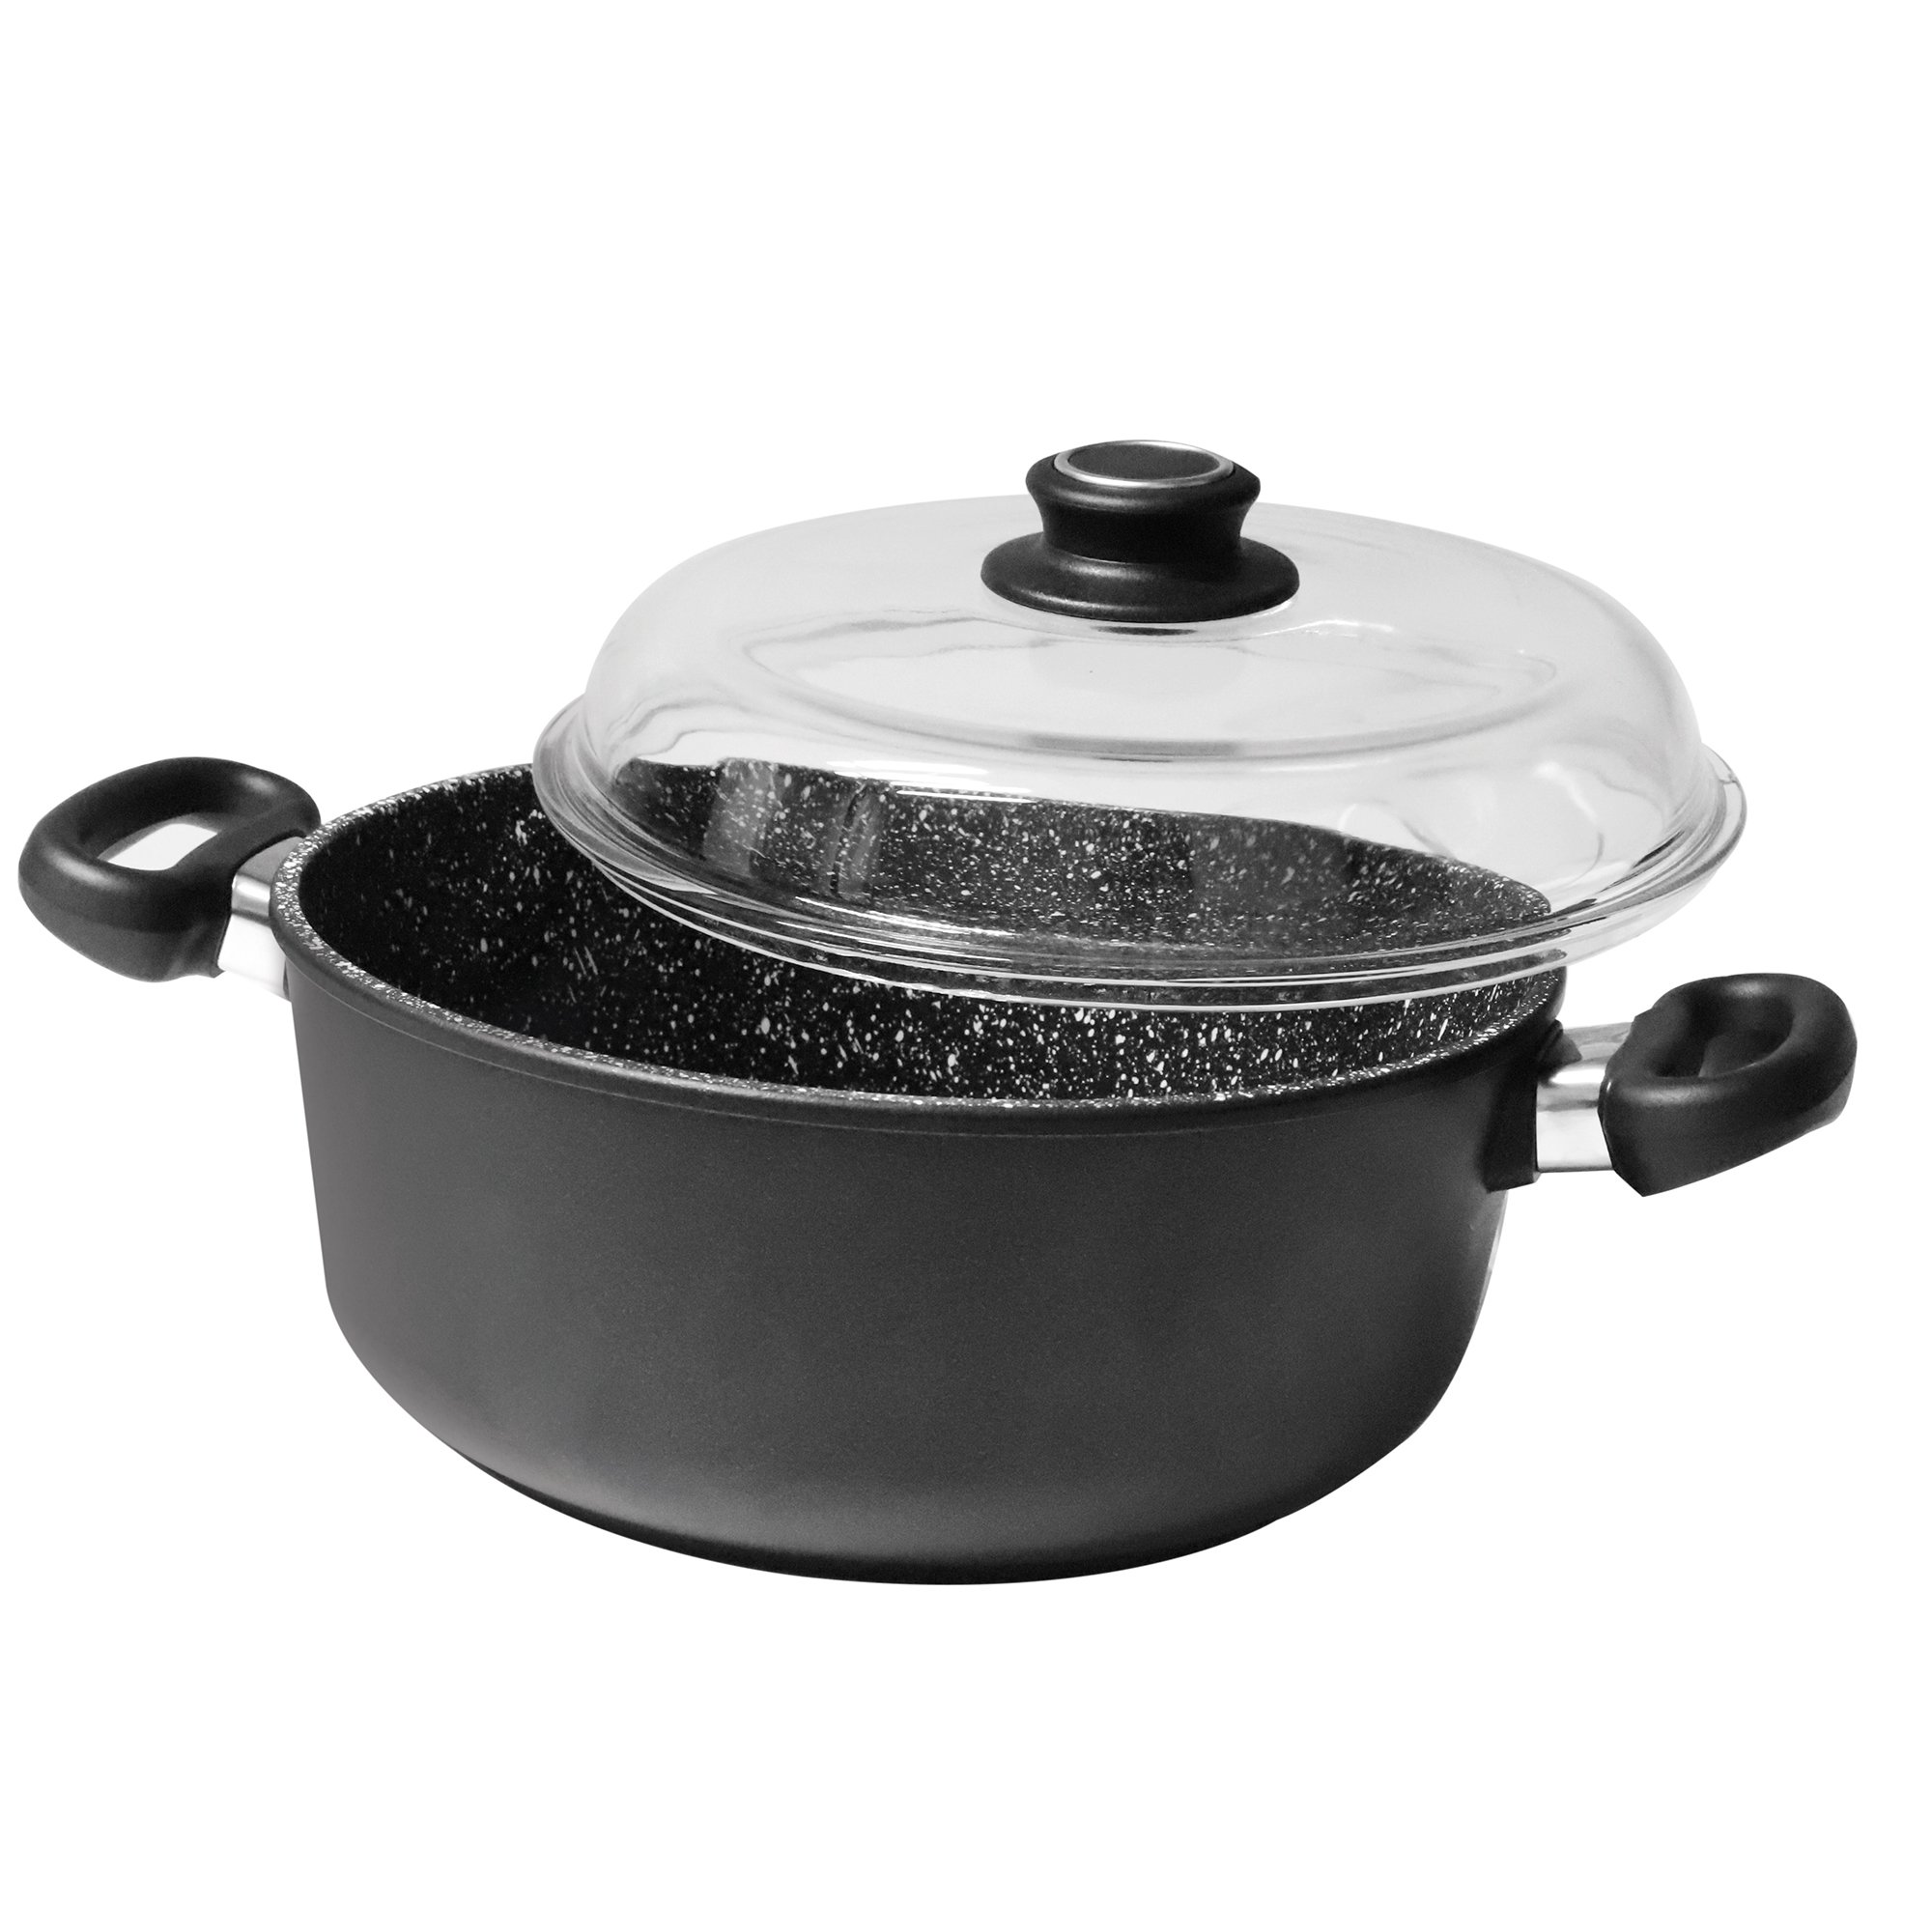 STONELINE® Cooking Pot 26 cm, with Lid, Large Cast Non-Stick Pot | Made in Germany